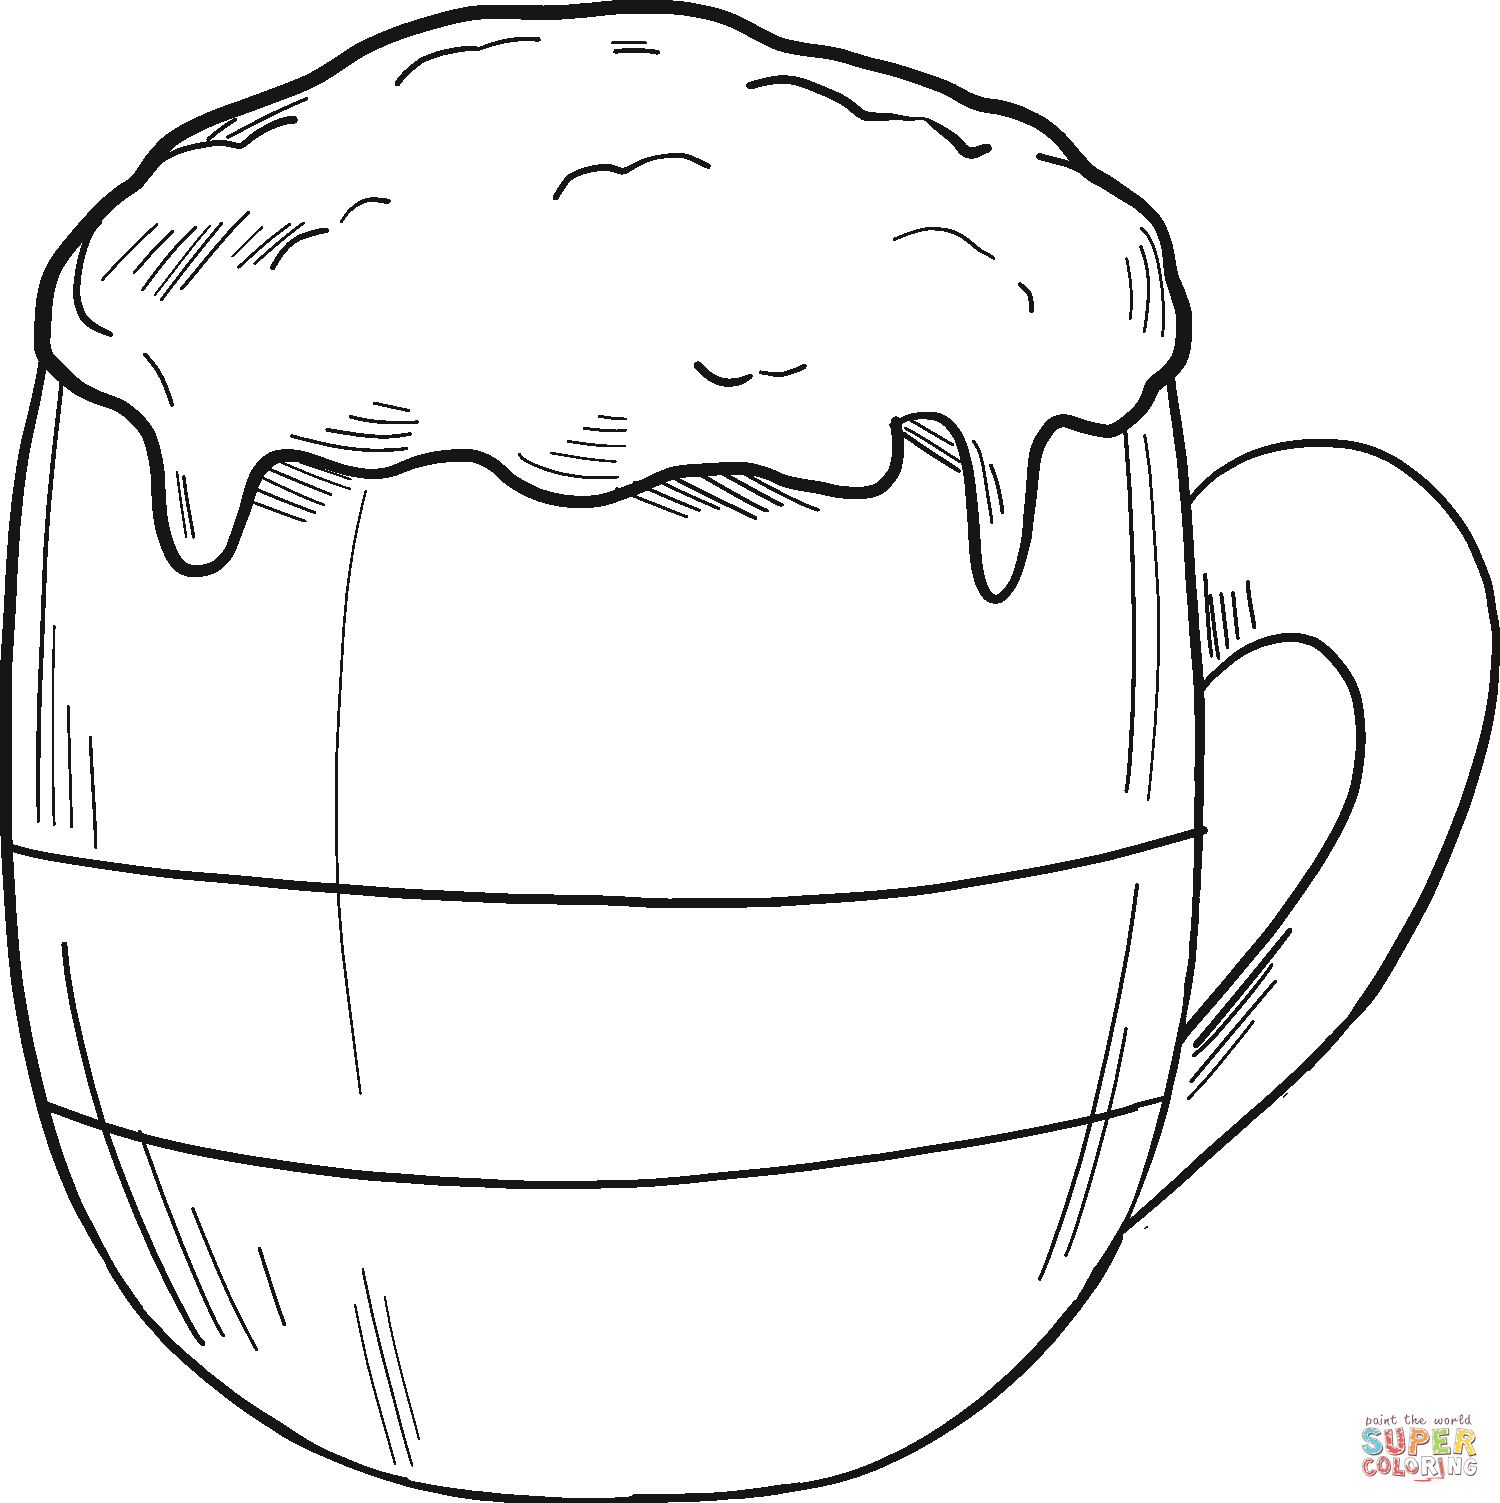 Hot Chocolate coloring page | Free Printable Coloring Pages